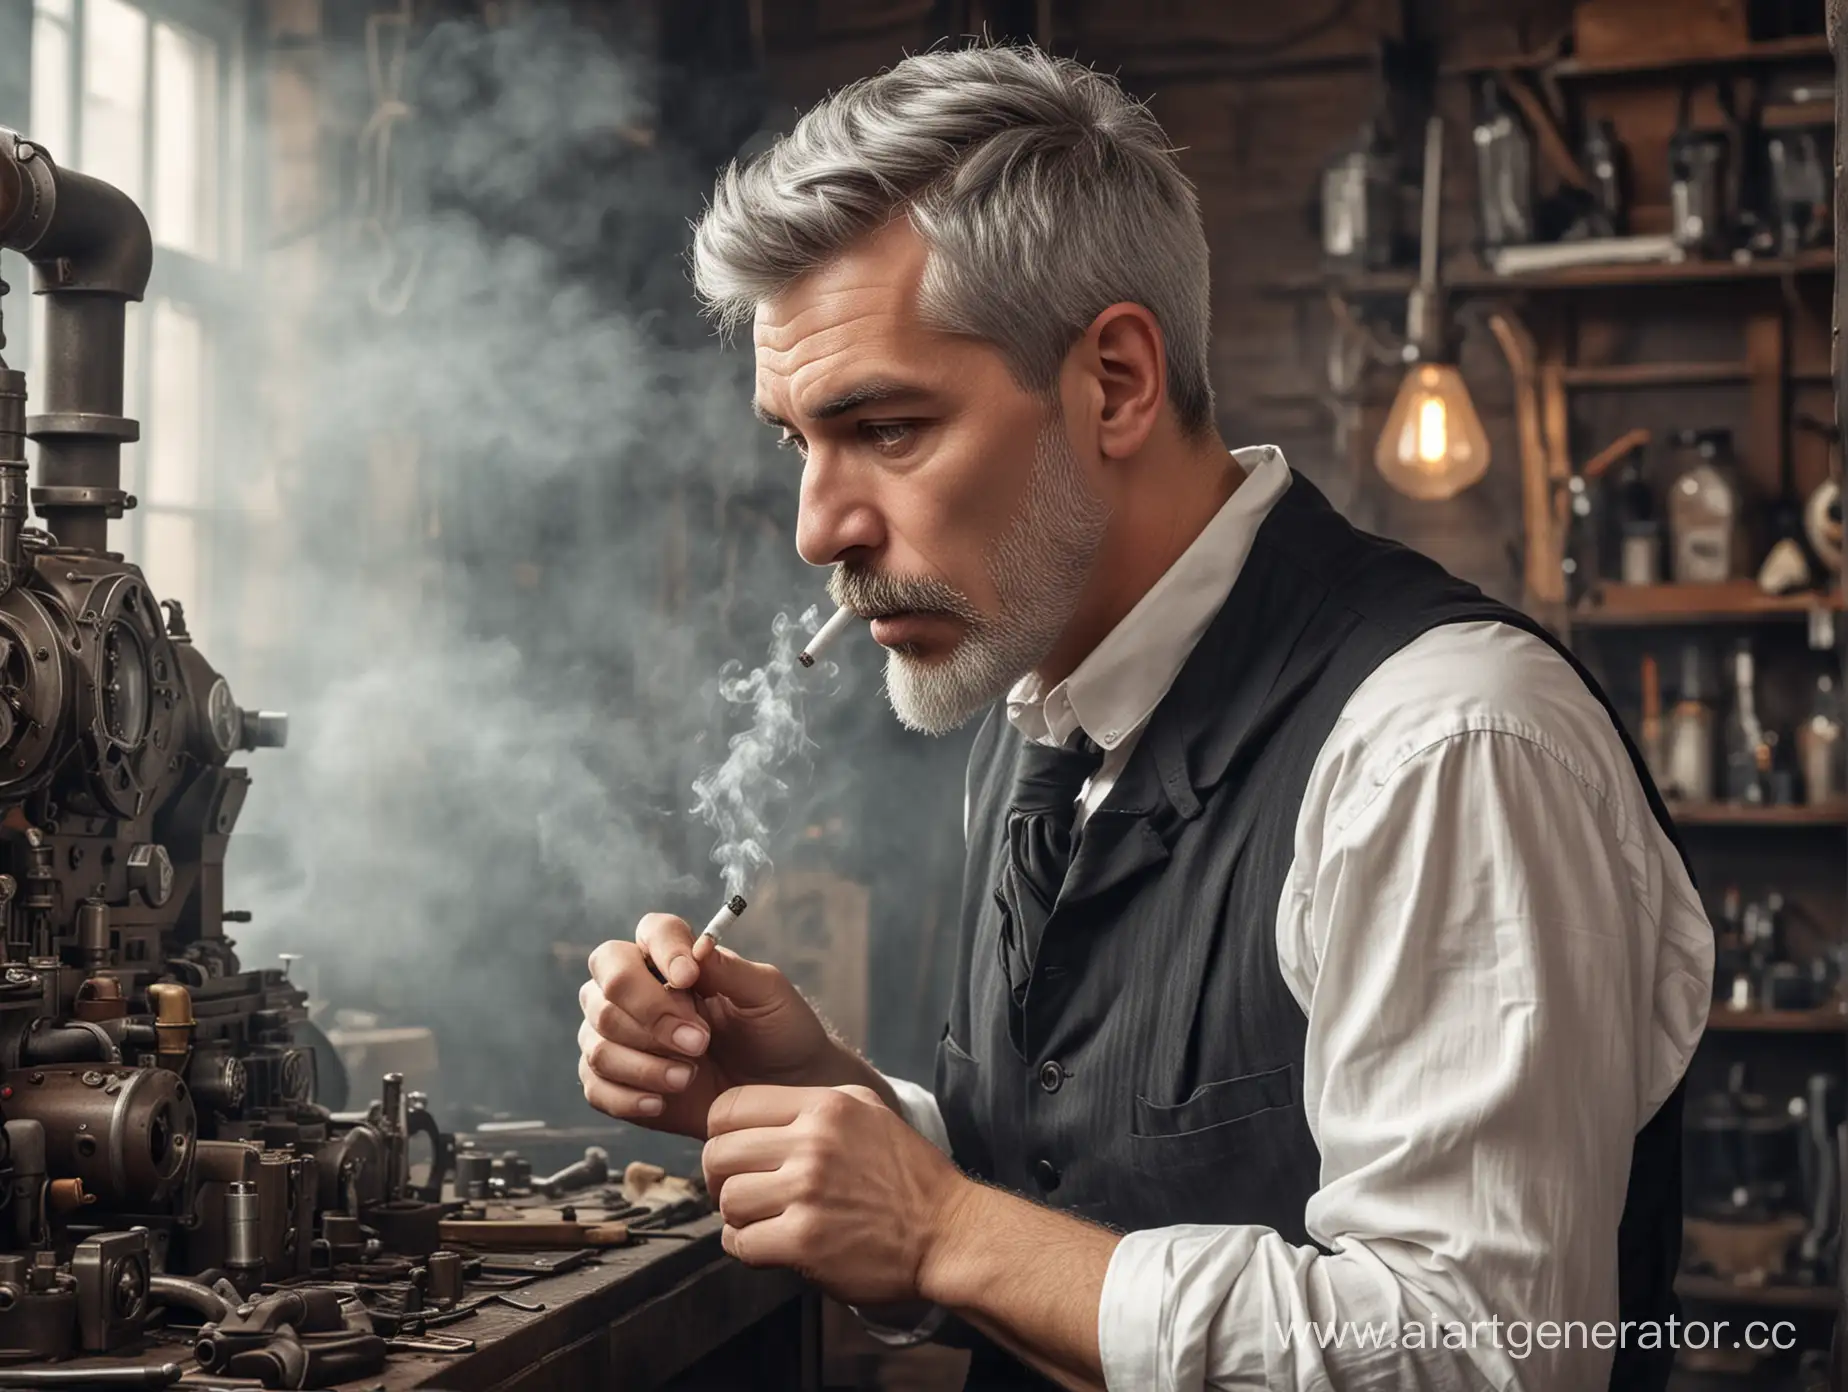 Steampunk-Machinist-with-Cigarette-at-Workbench